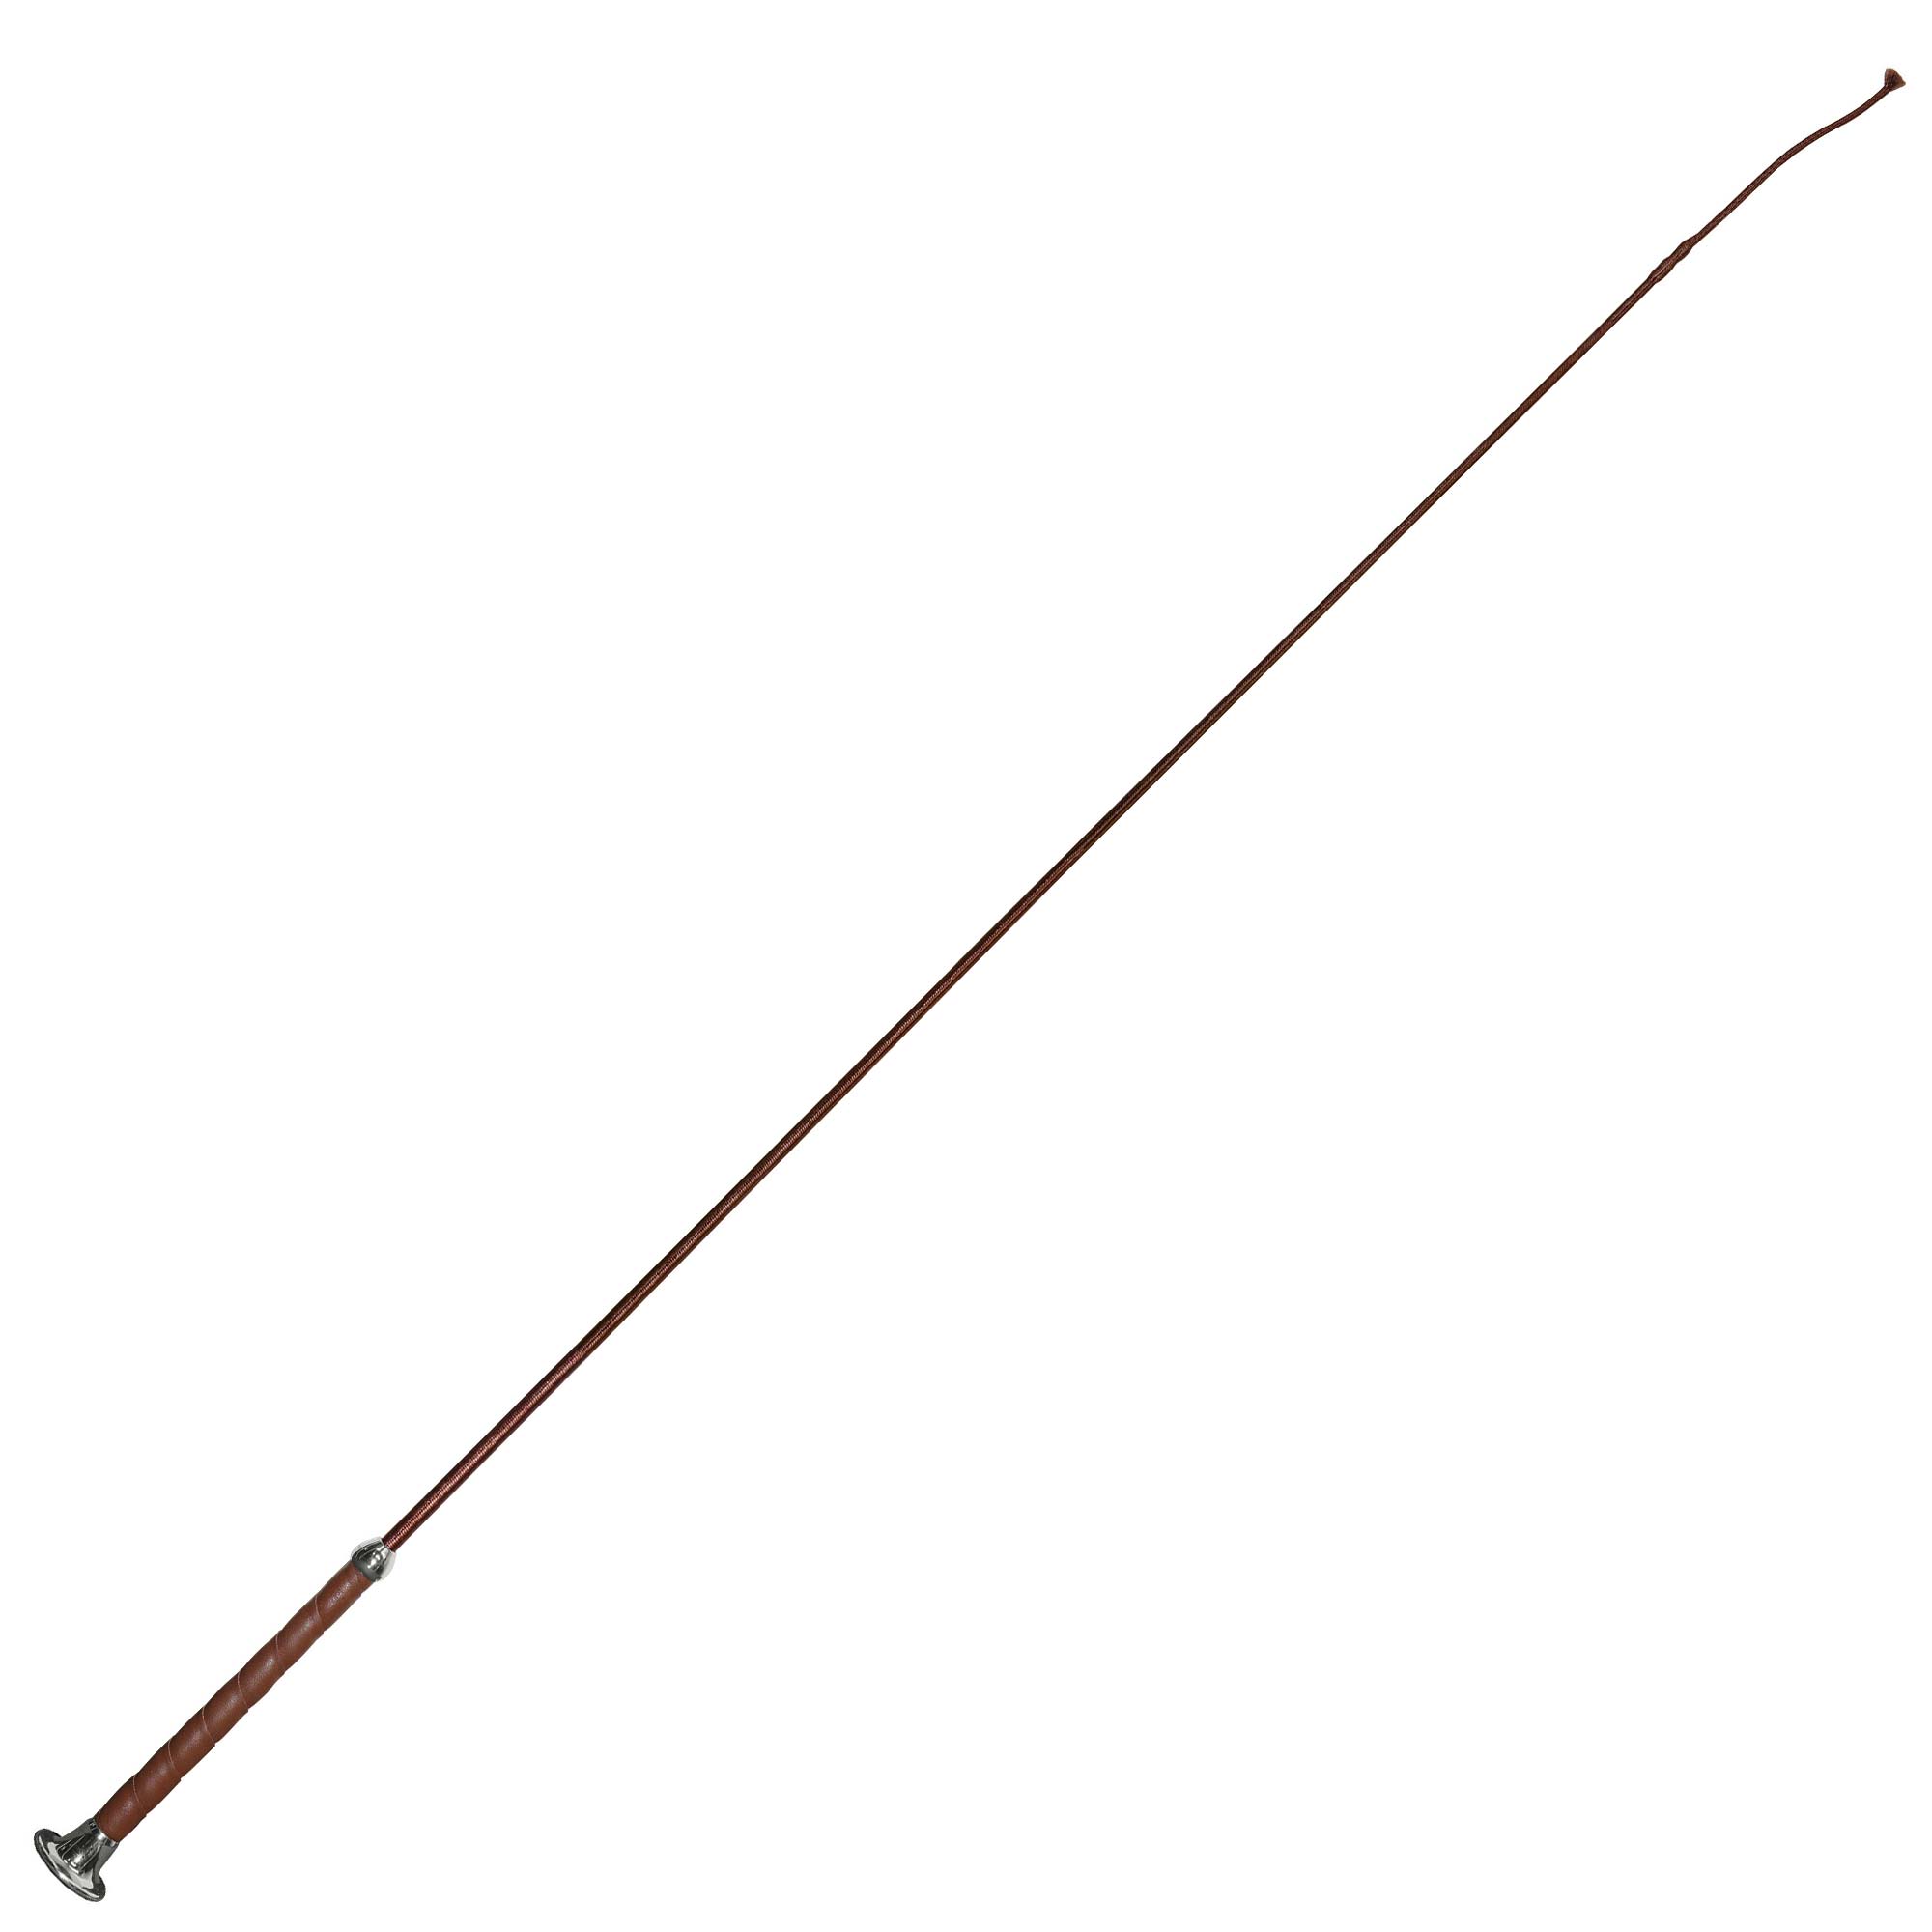 Dressage whip 110 cm leather grip brown